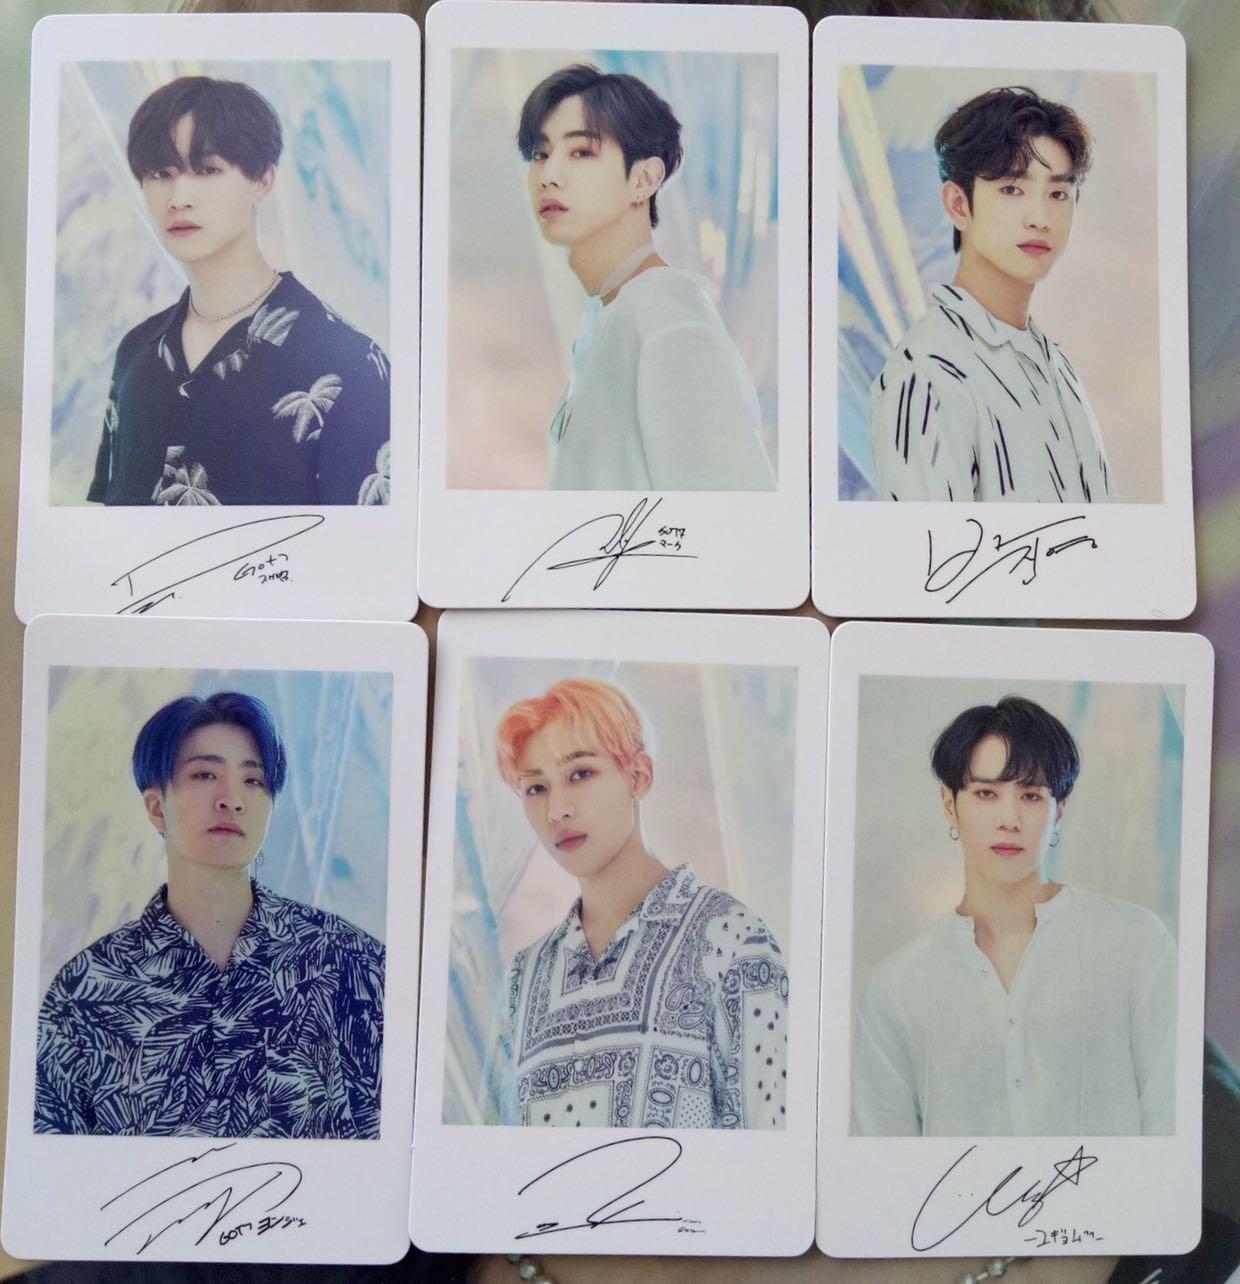 Share Got7 Japan Tour Our Loop Merchandise Photocard Set Entertainment K Wave On Carousell